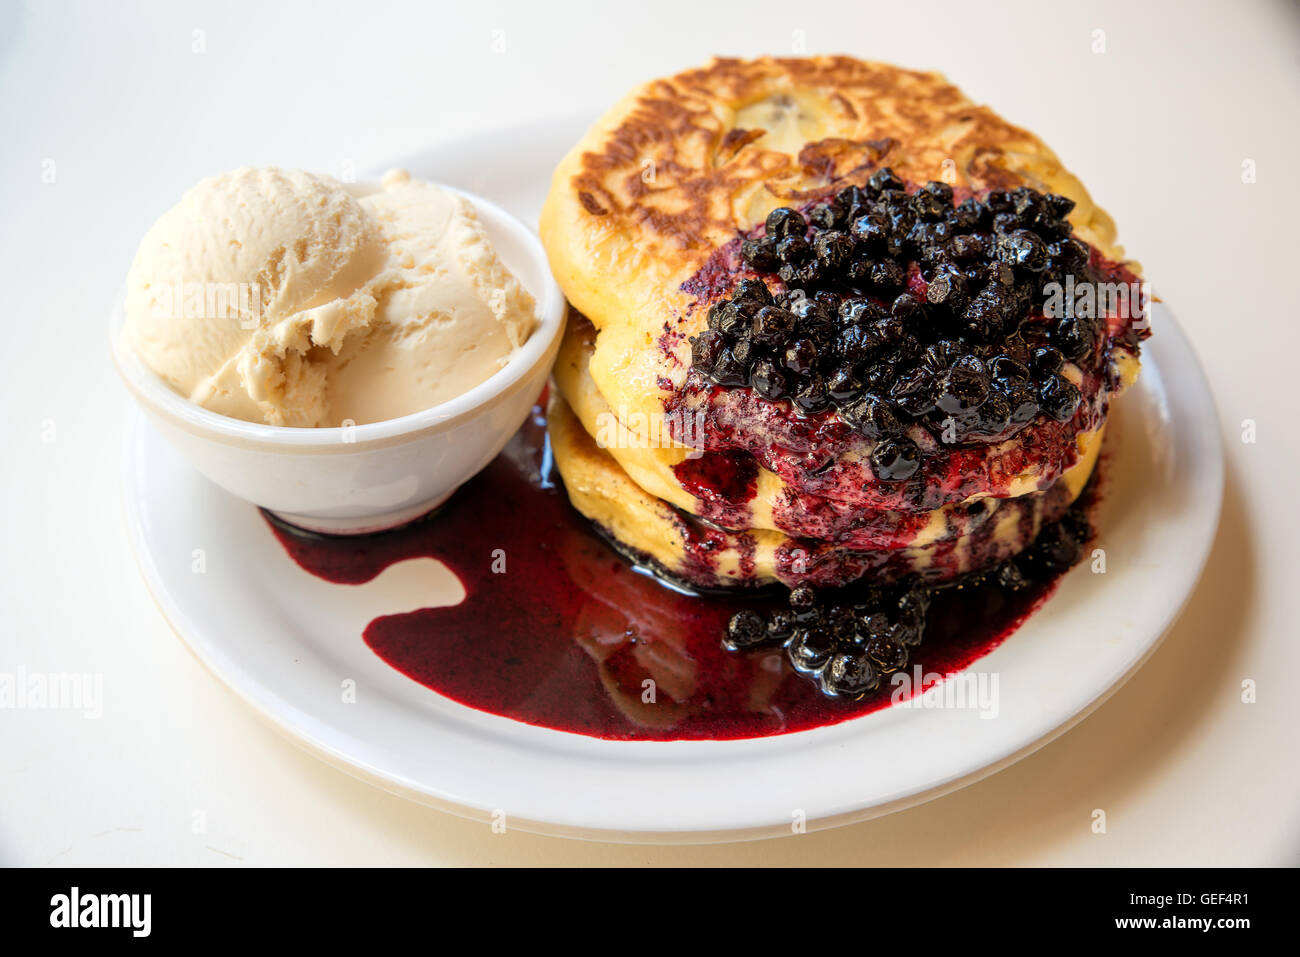 Freshly homemade desserts pancakes with vanilla icecream and blueberry topping on pancakes. Stock Photo